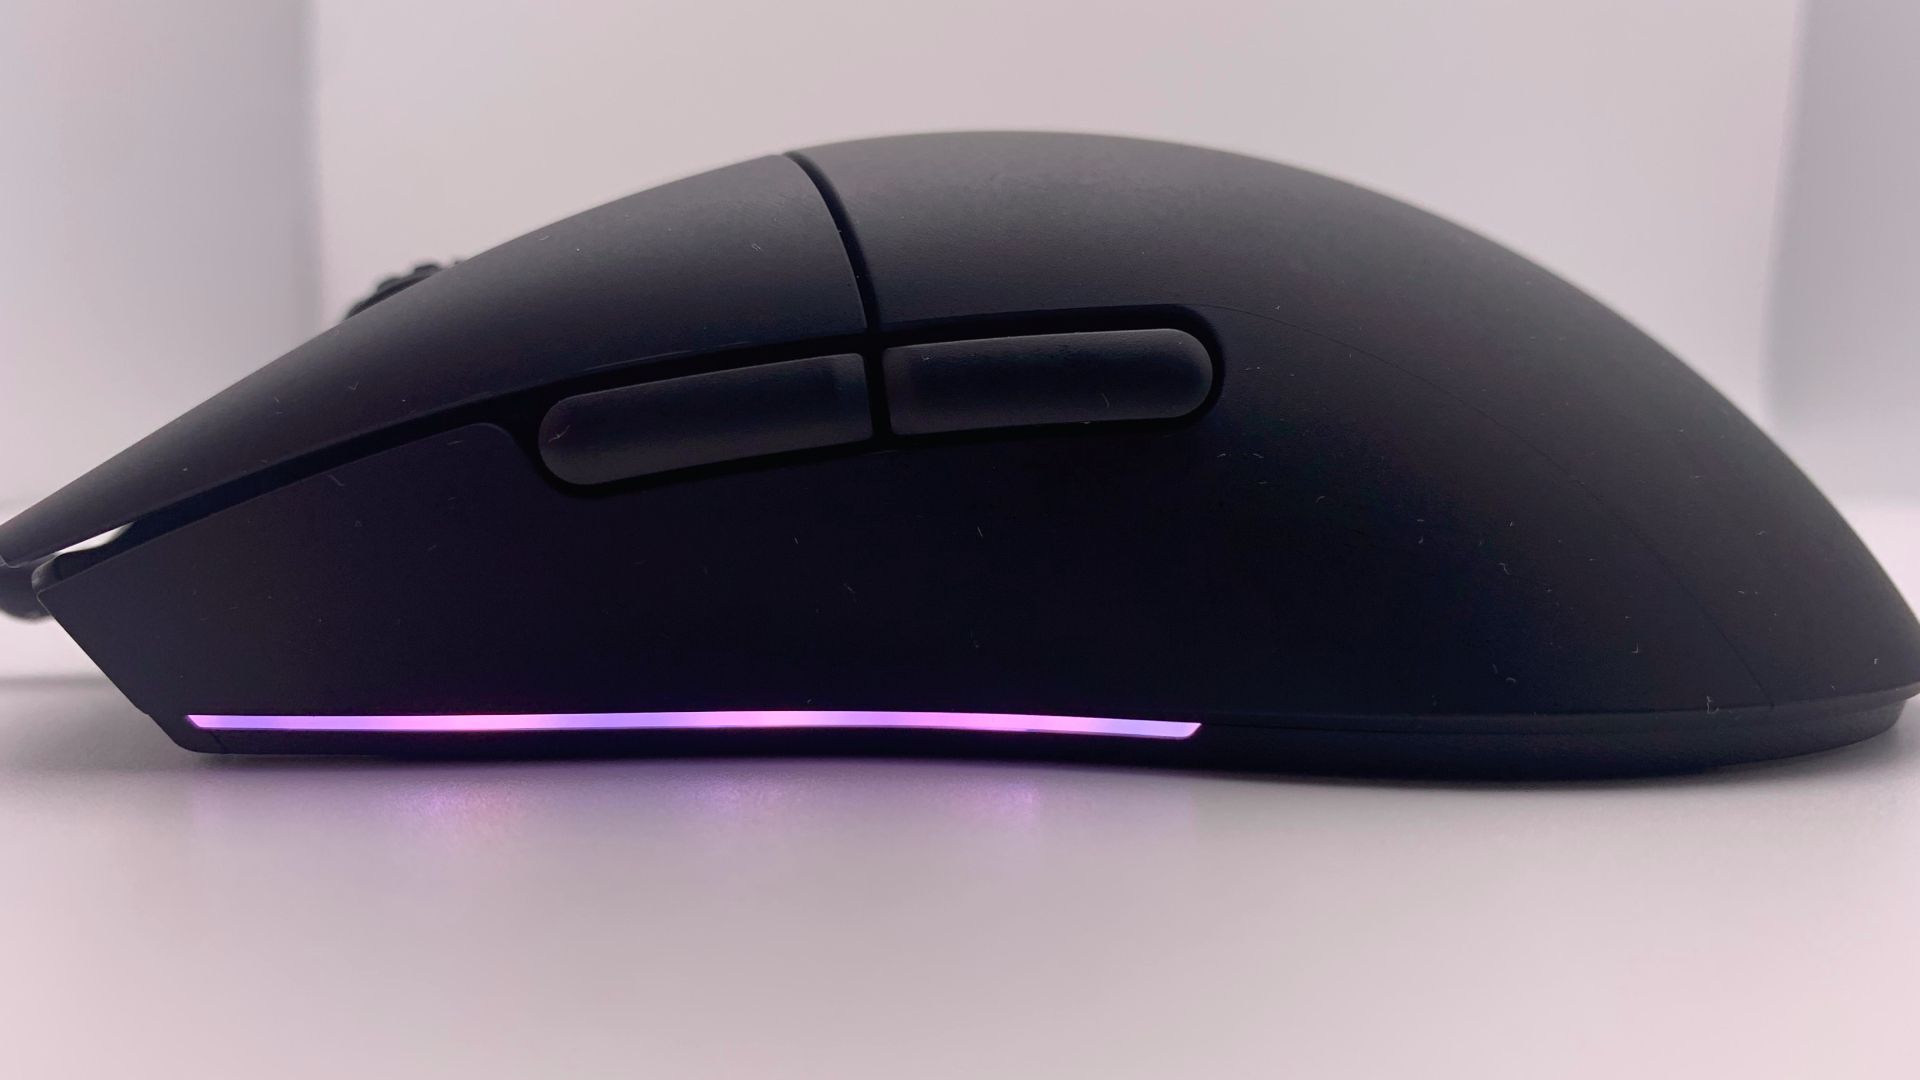 NZXT Lift Gaming Mouse side view